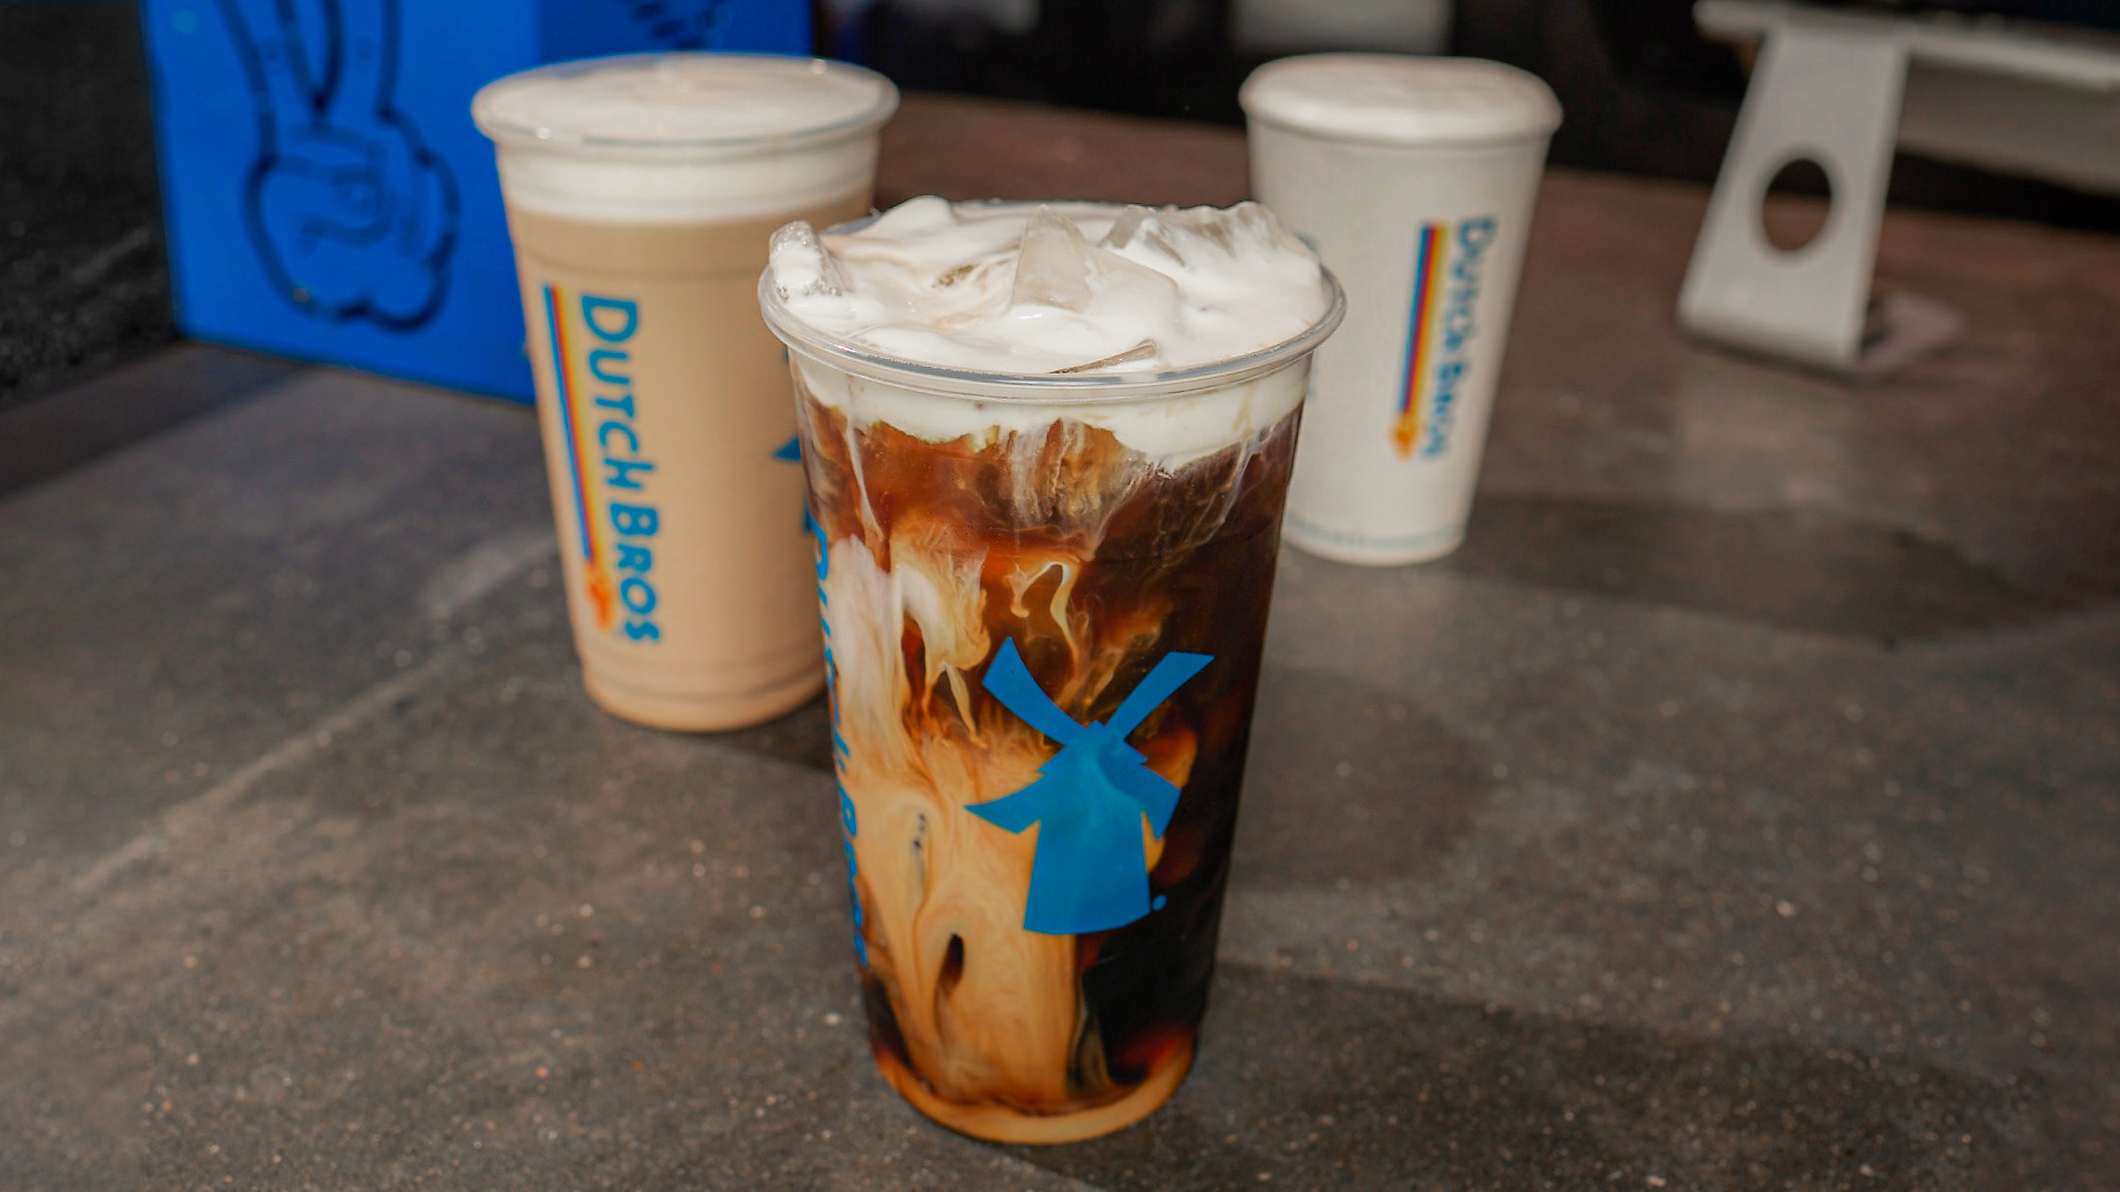 Your new fave drinks! Kick off the day with a Kicker featuring Irish cream breve. Dutch Bros Coffee Fresno (541)955-4700